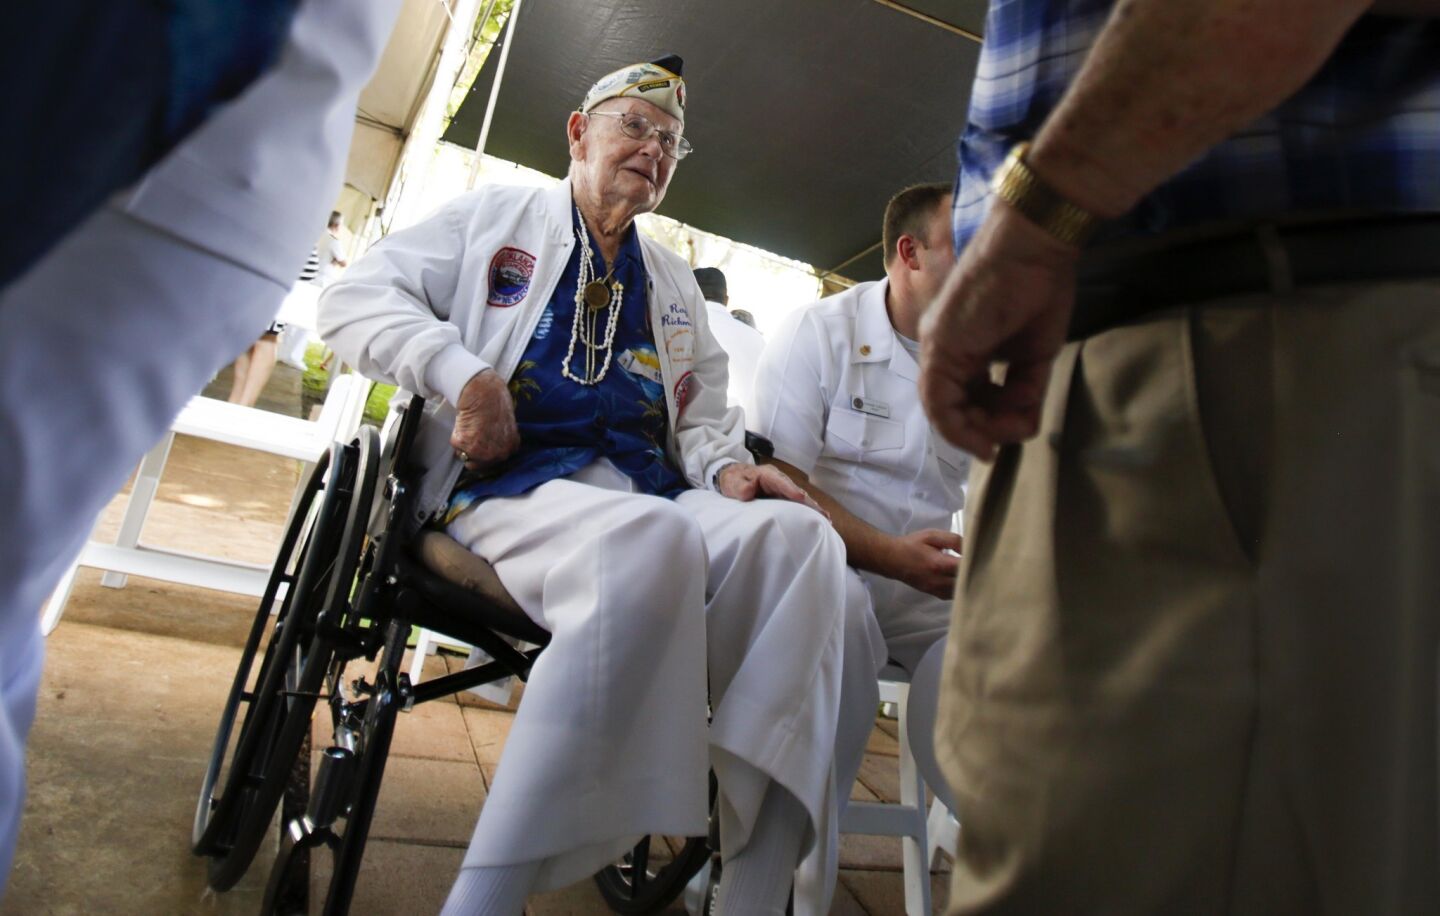 97-year-old USS Oklahoma, Pearl Harbor survivor Ray Richmond and about 24 other World War II veterans, of which about 15 are Pearl Harbor survivors, visited the students Navy Hale Keiki School during a trip sponsored by the Greatest Generations Foundation. Some told their stories of survival on December 7, 1941, the day Japan attacked Pearl Harbor thrusting The United States into World War II.